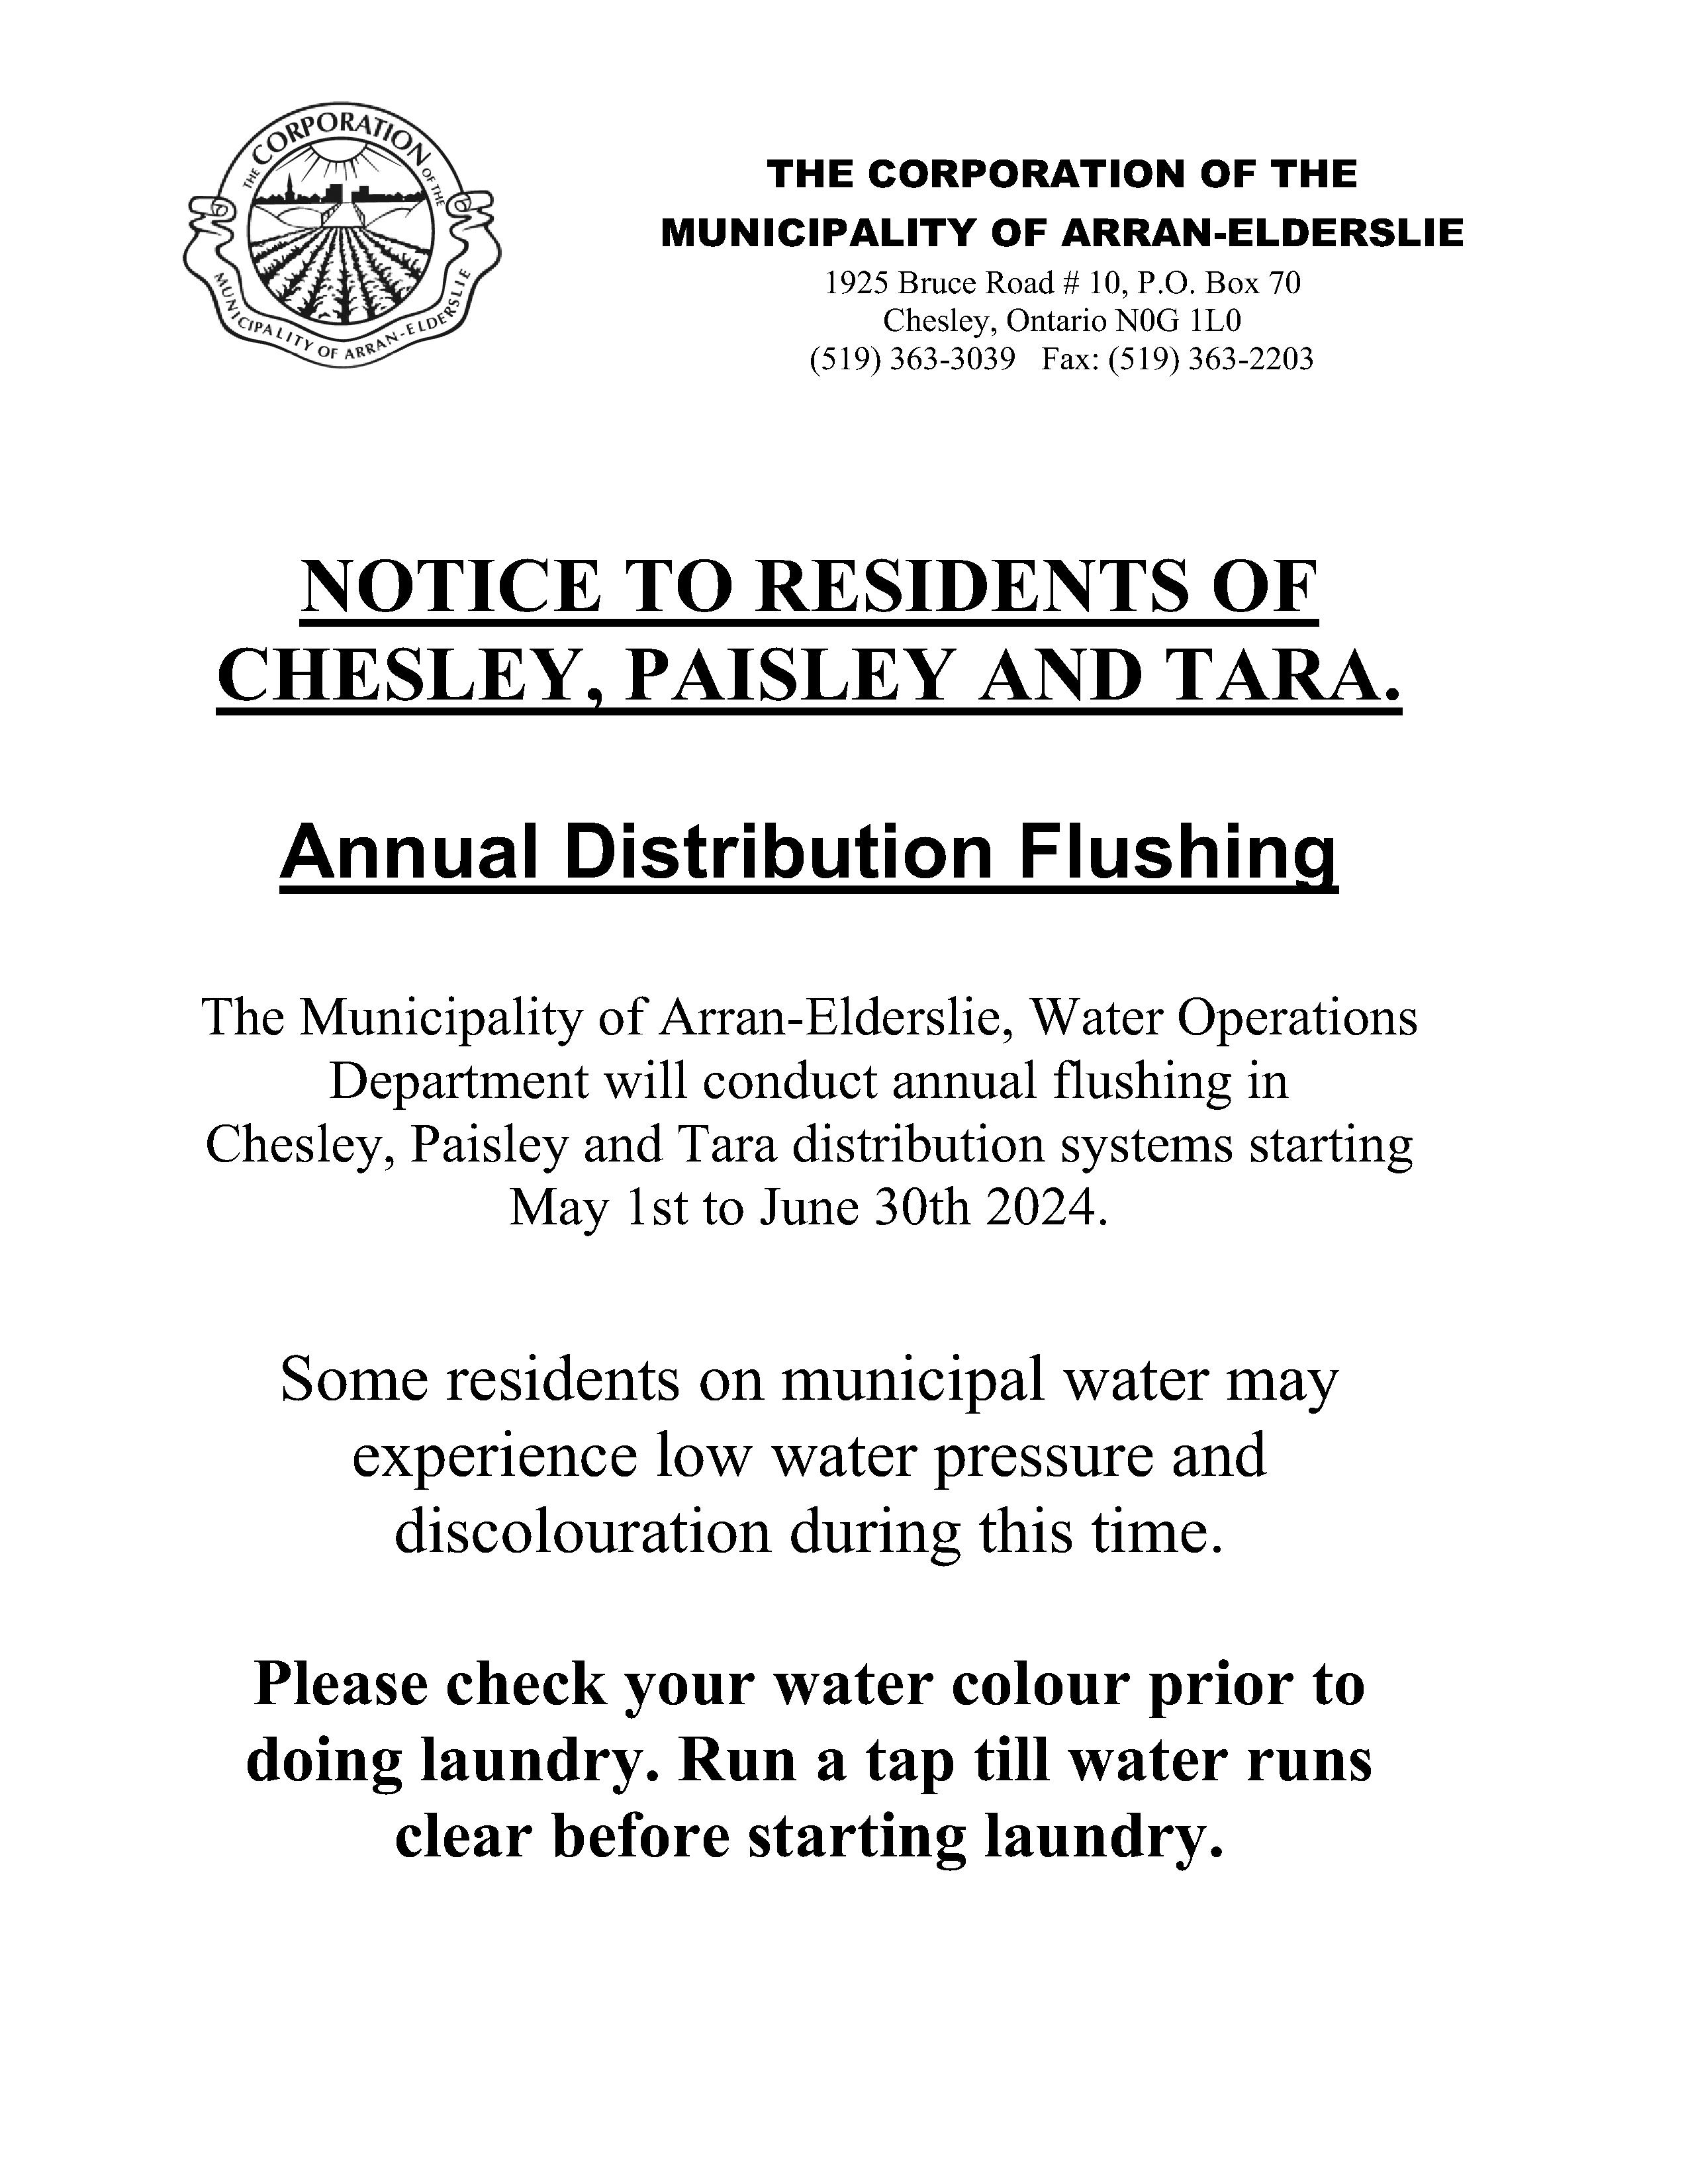 Annual Distribution Flushing of the Municipal Water Systems